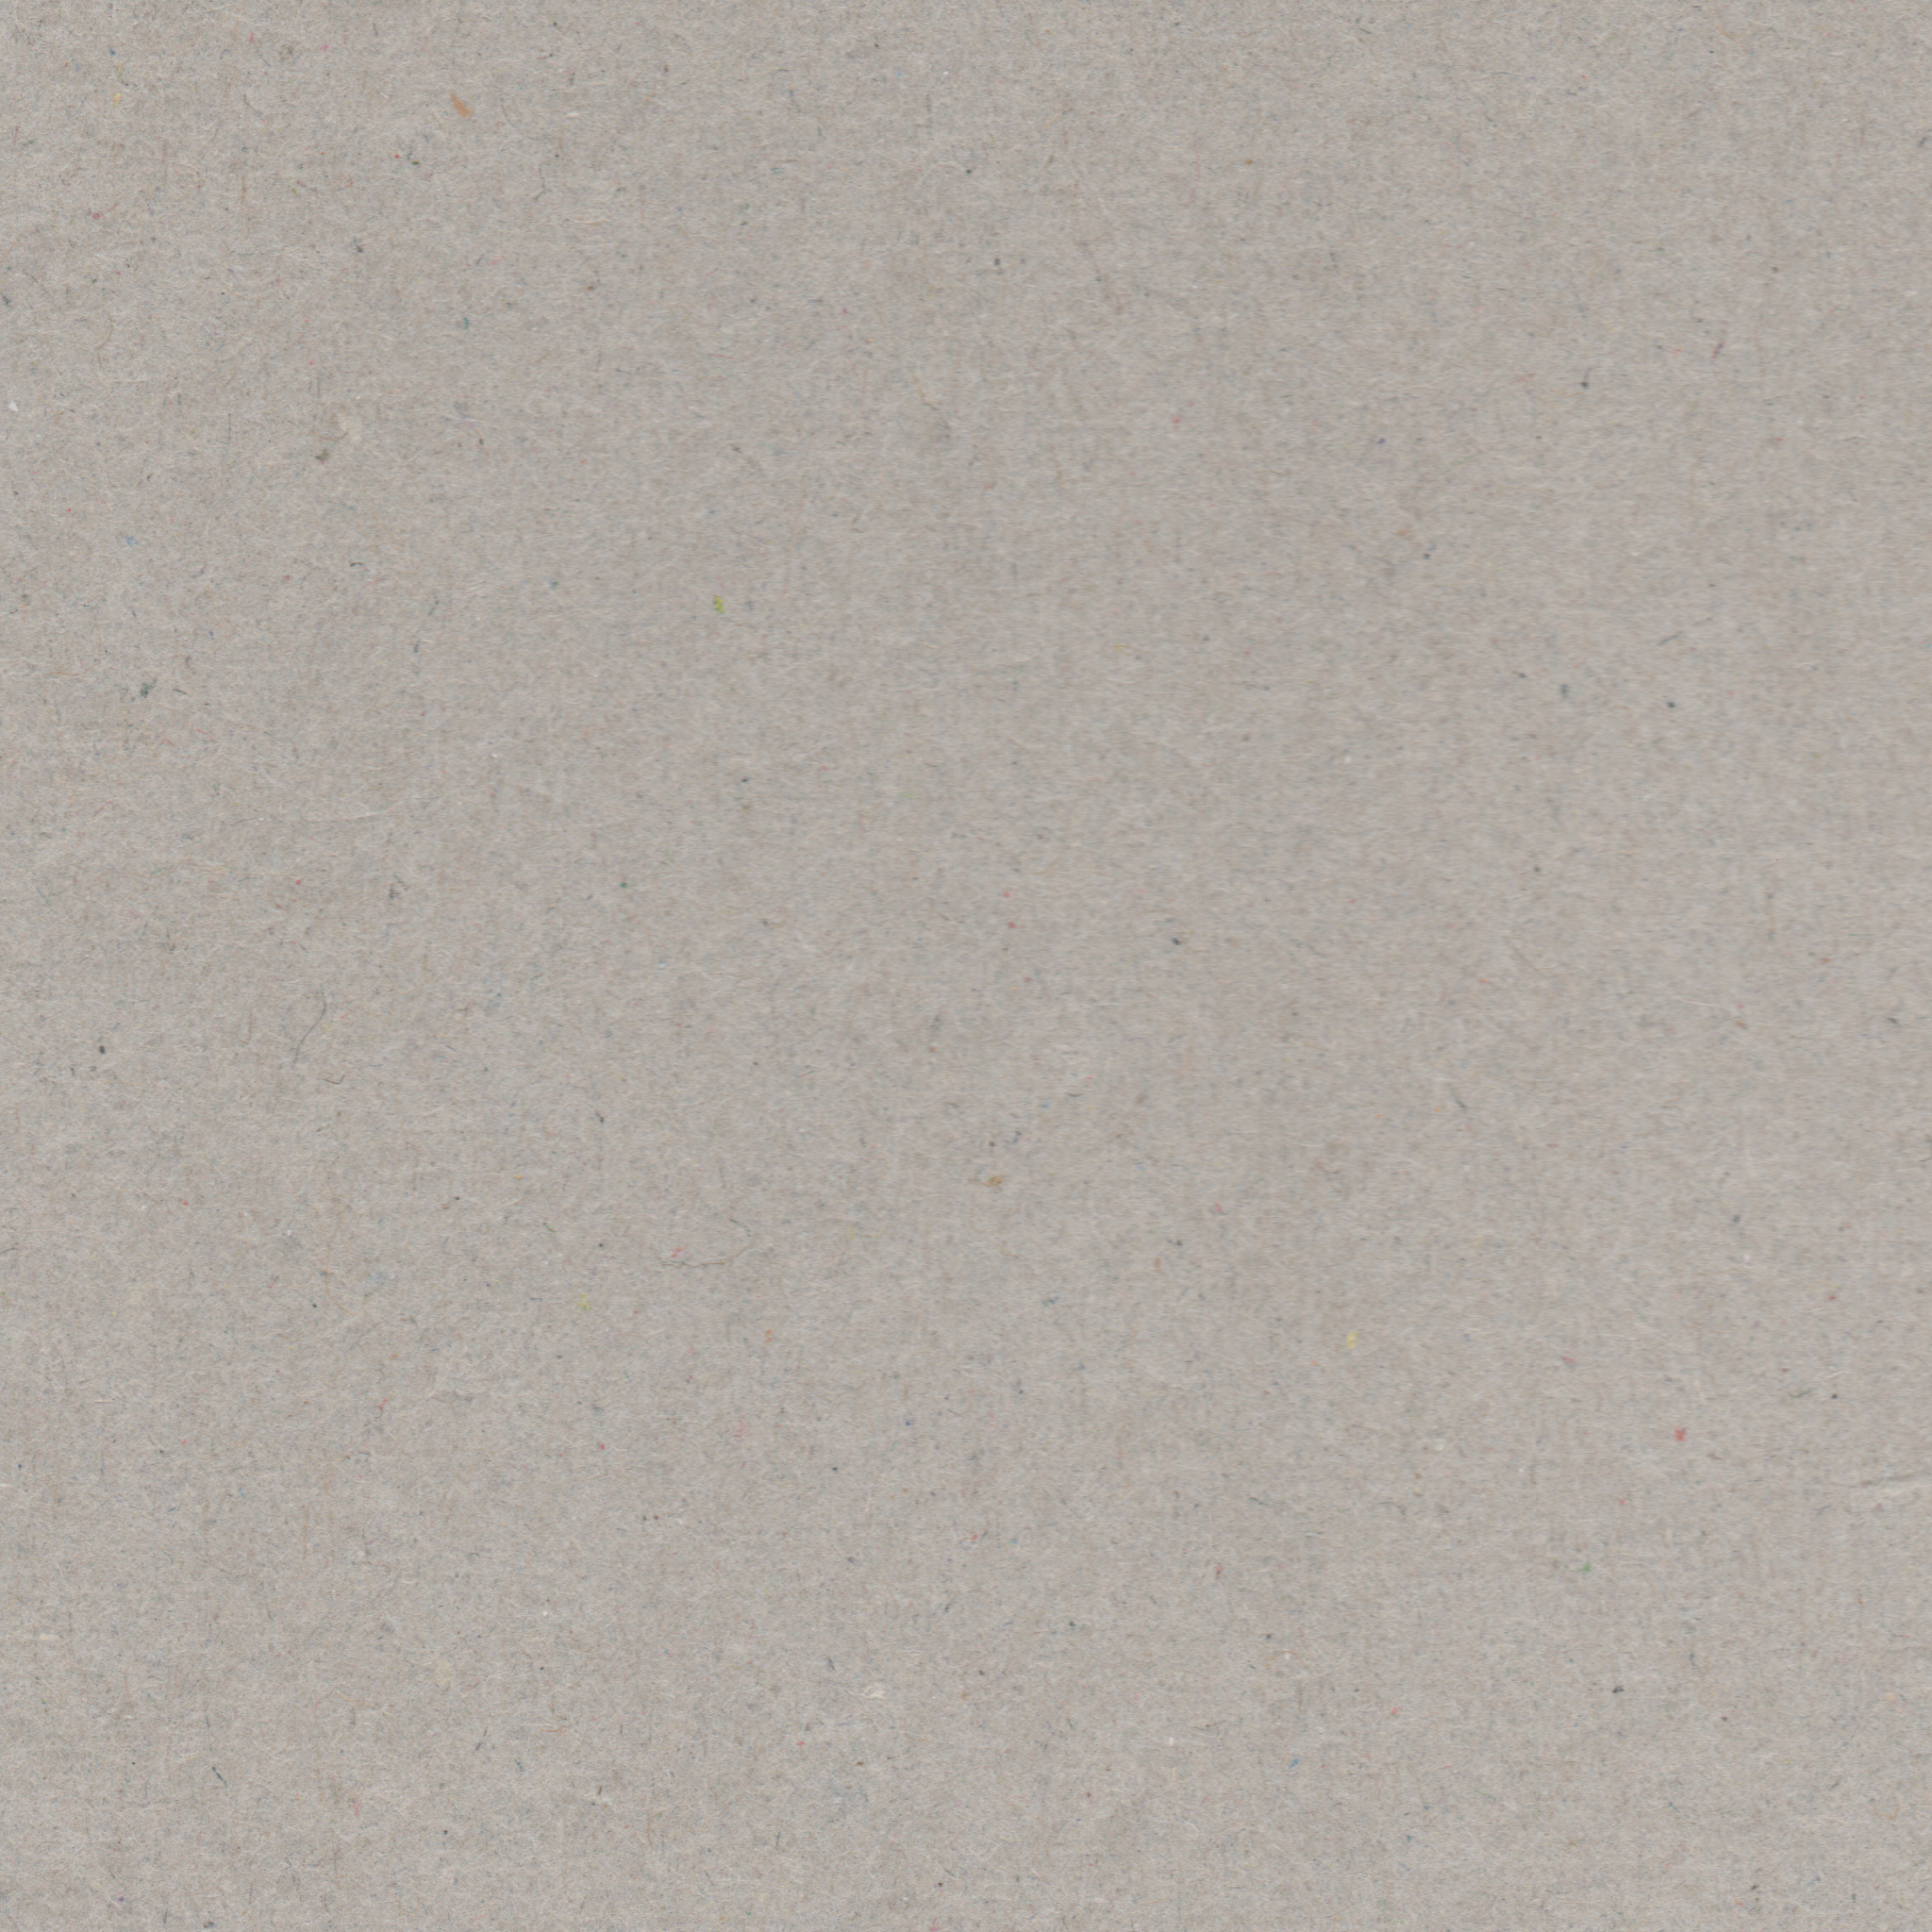 Gray Construction Paper Seamless Background Image, Wallpaper or Texture  free for any web page, desktop, phone or blog